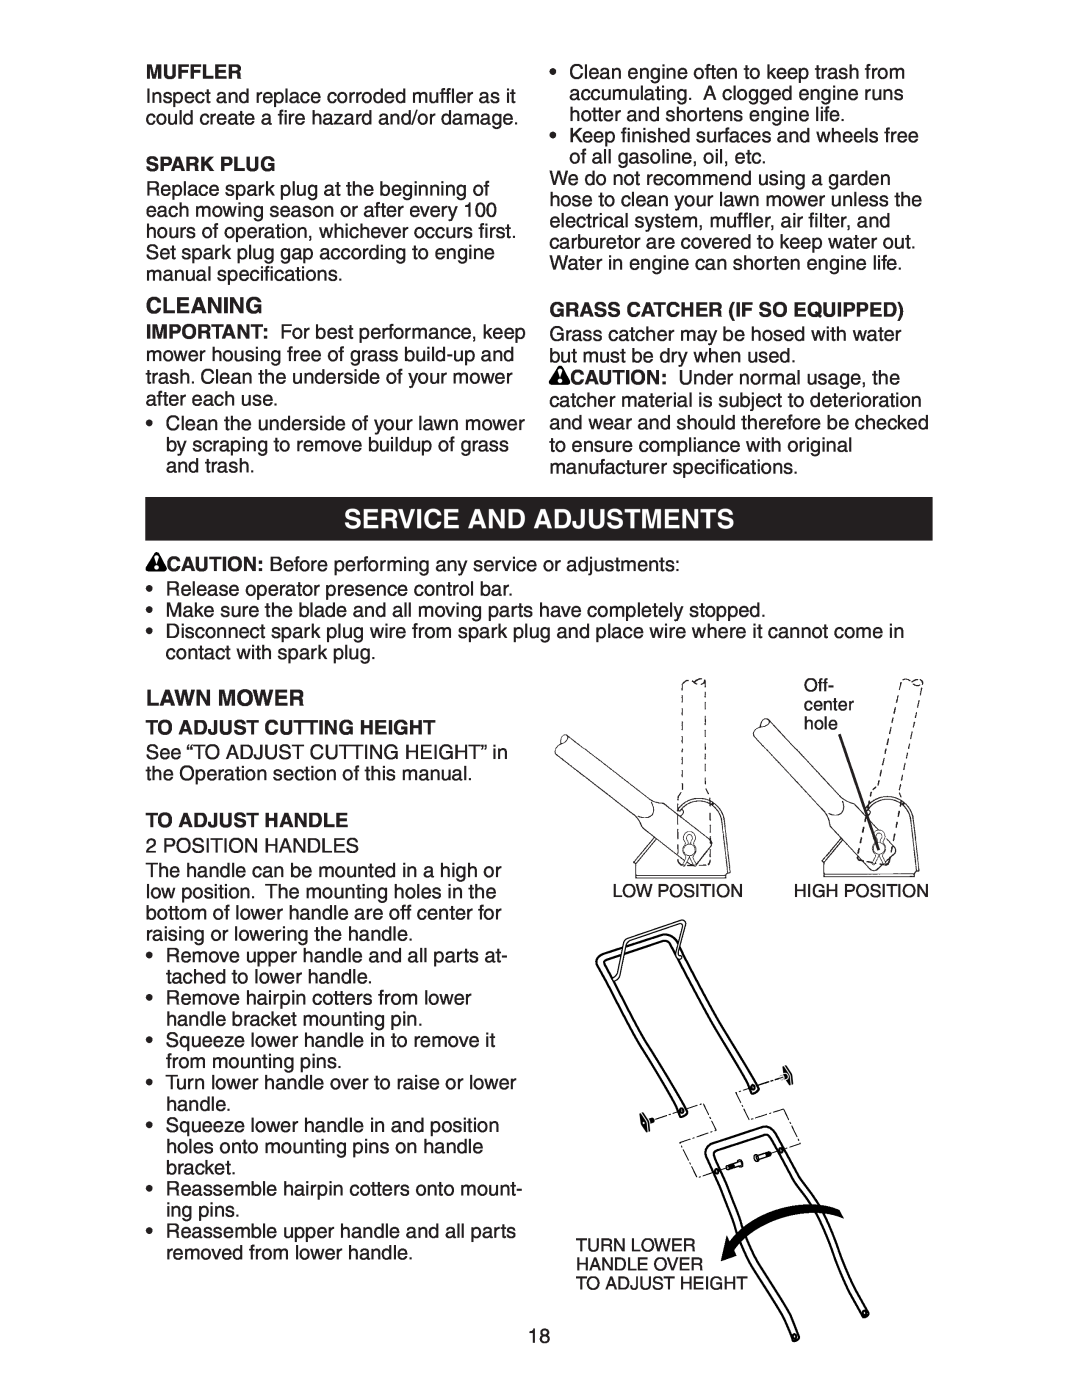 Poulan 172782 manual Service And Adjustments, Cleaning, Lawn Mower 